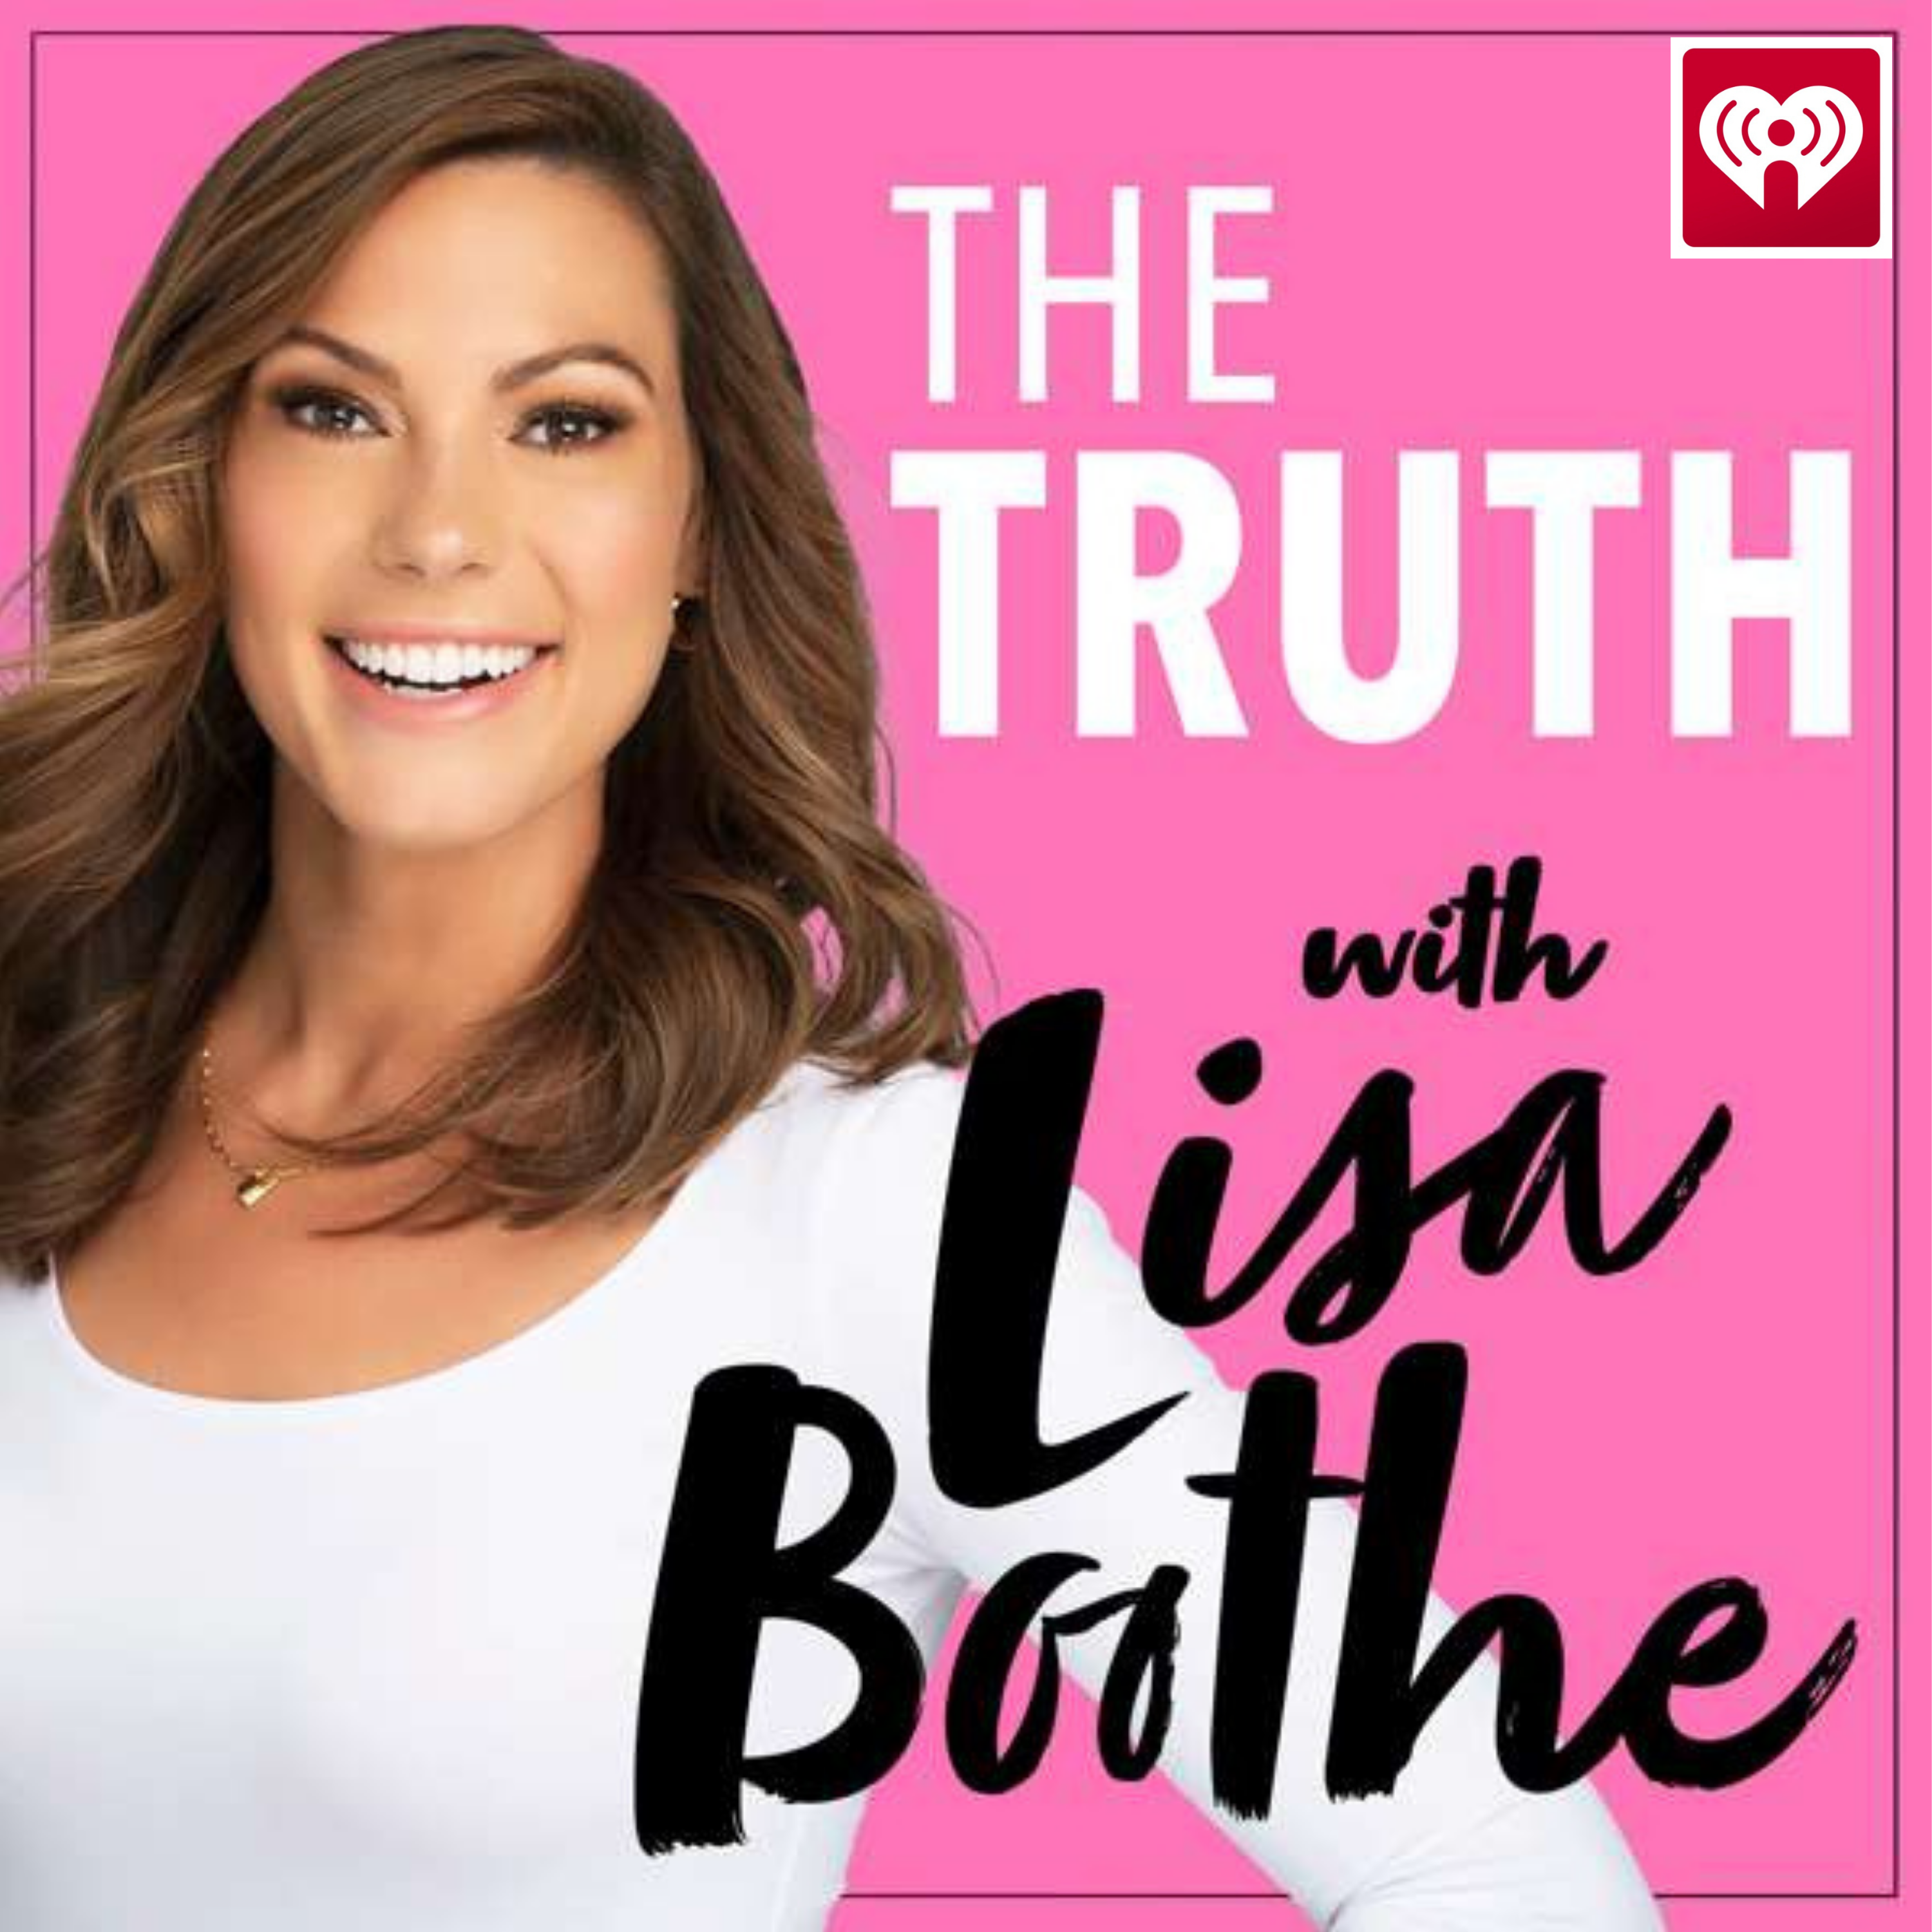 The Truth with Lisa Boothe: The Judicial System vs. Donald Trump with Lexie Rigden